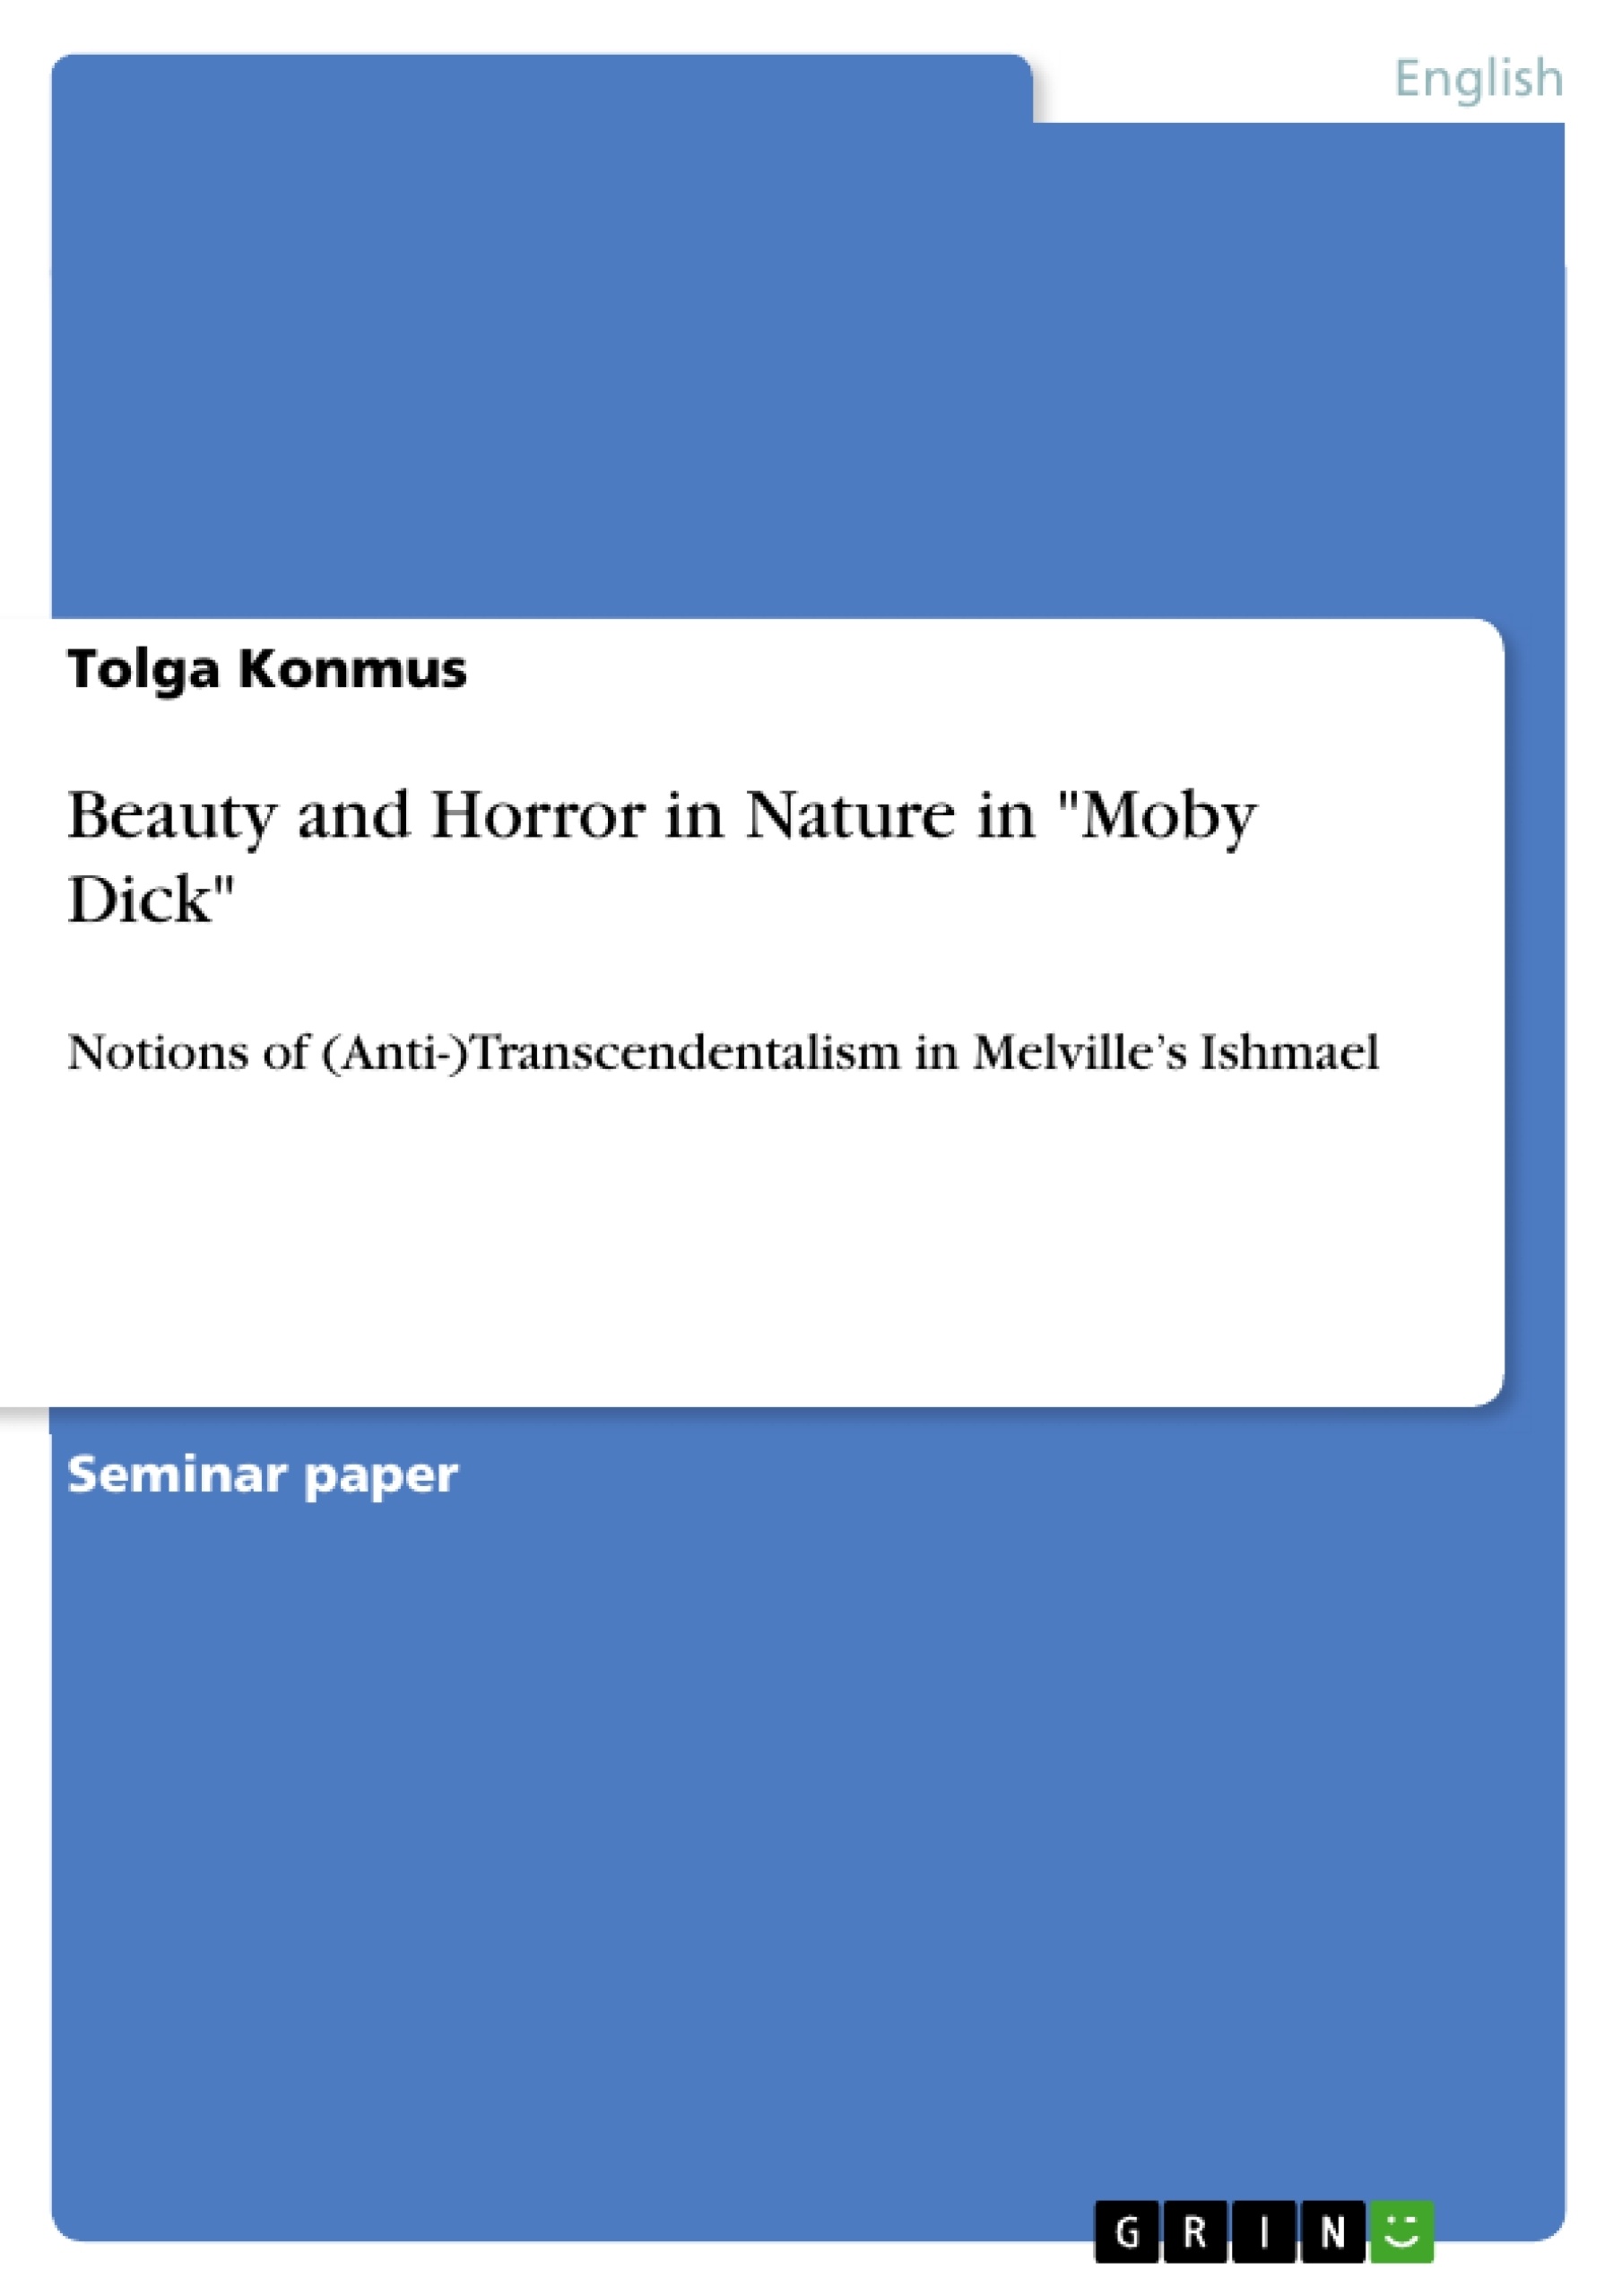 Title: Beauty and Horror in Nature in "Moby Dick"